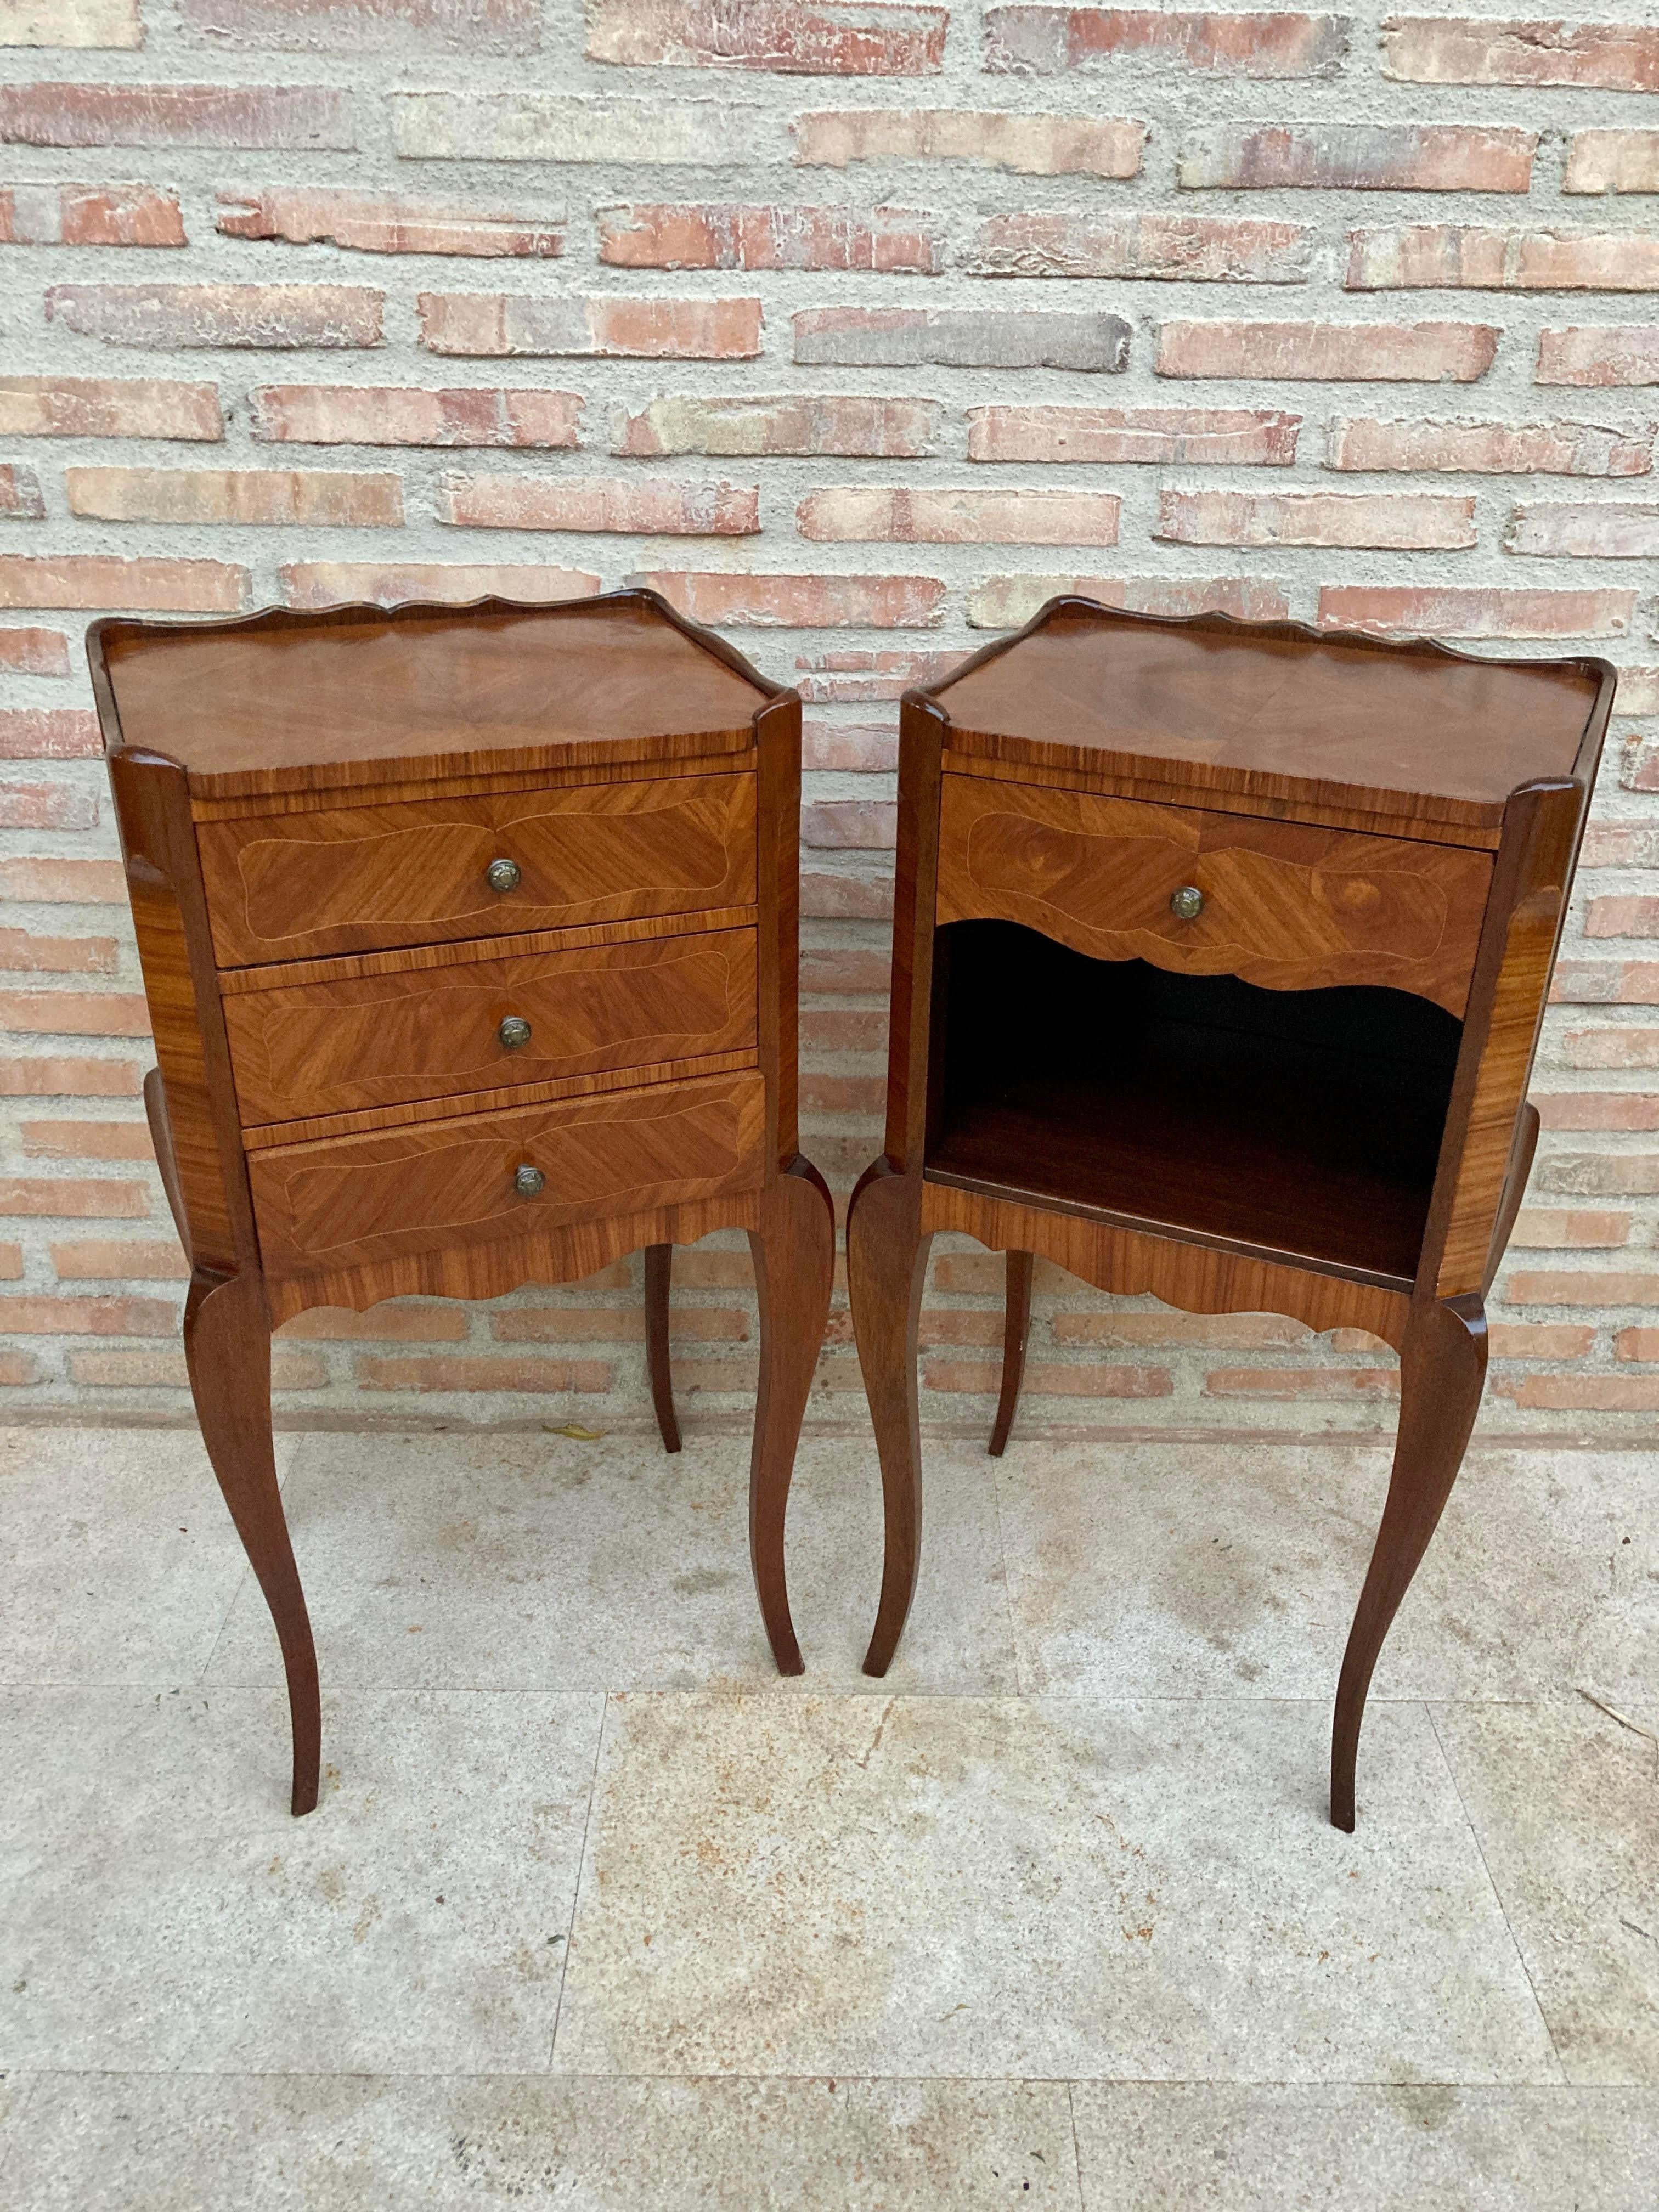 Matching Kingwood Louis XV style nightstands, distinguished from each other in that one has three drawers and the other has one drawer and one open shelf, with marquetry on top, sides and front. The pieces retain their original beautiful marquetry